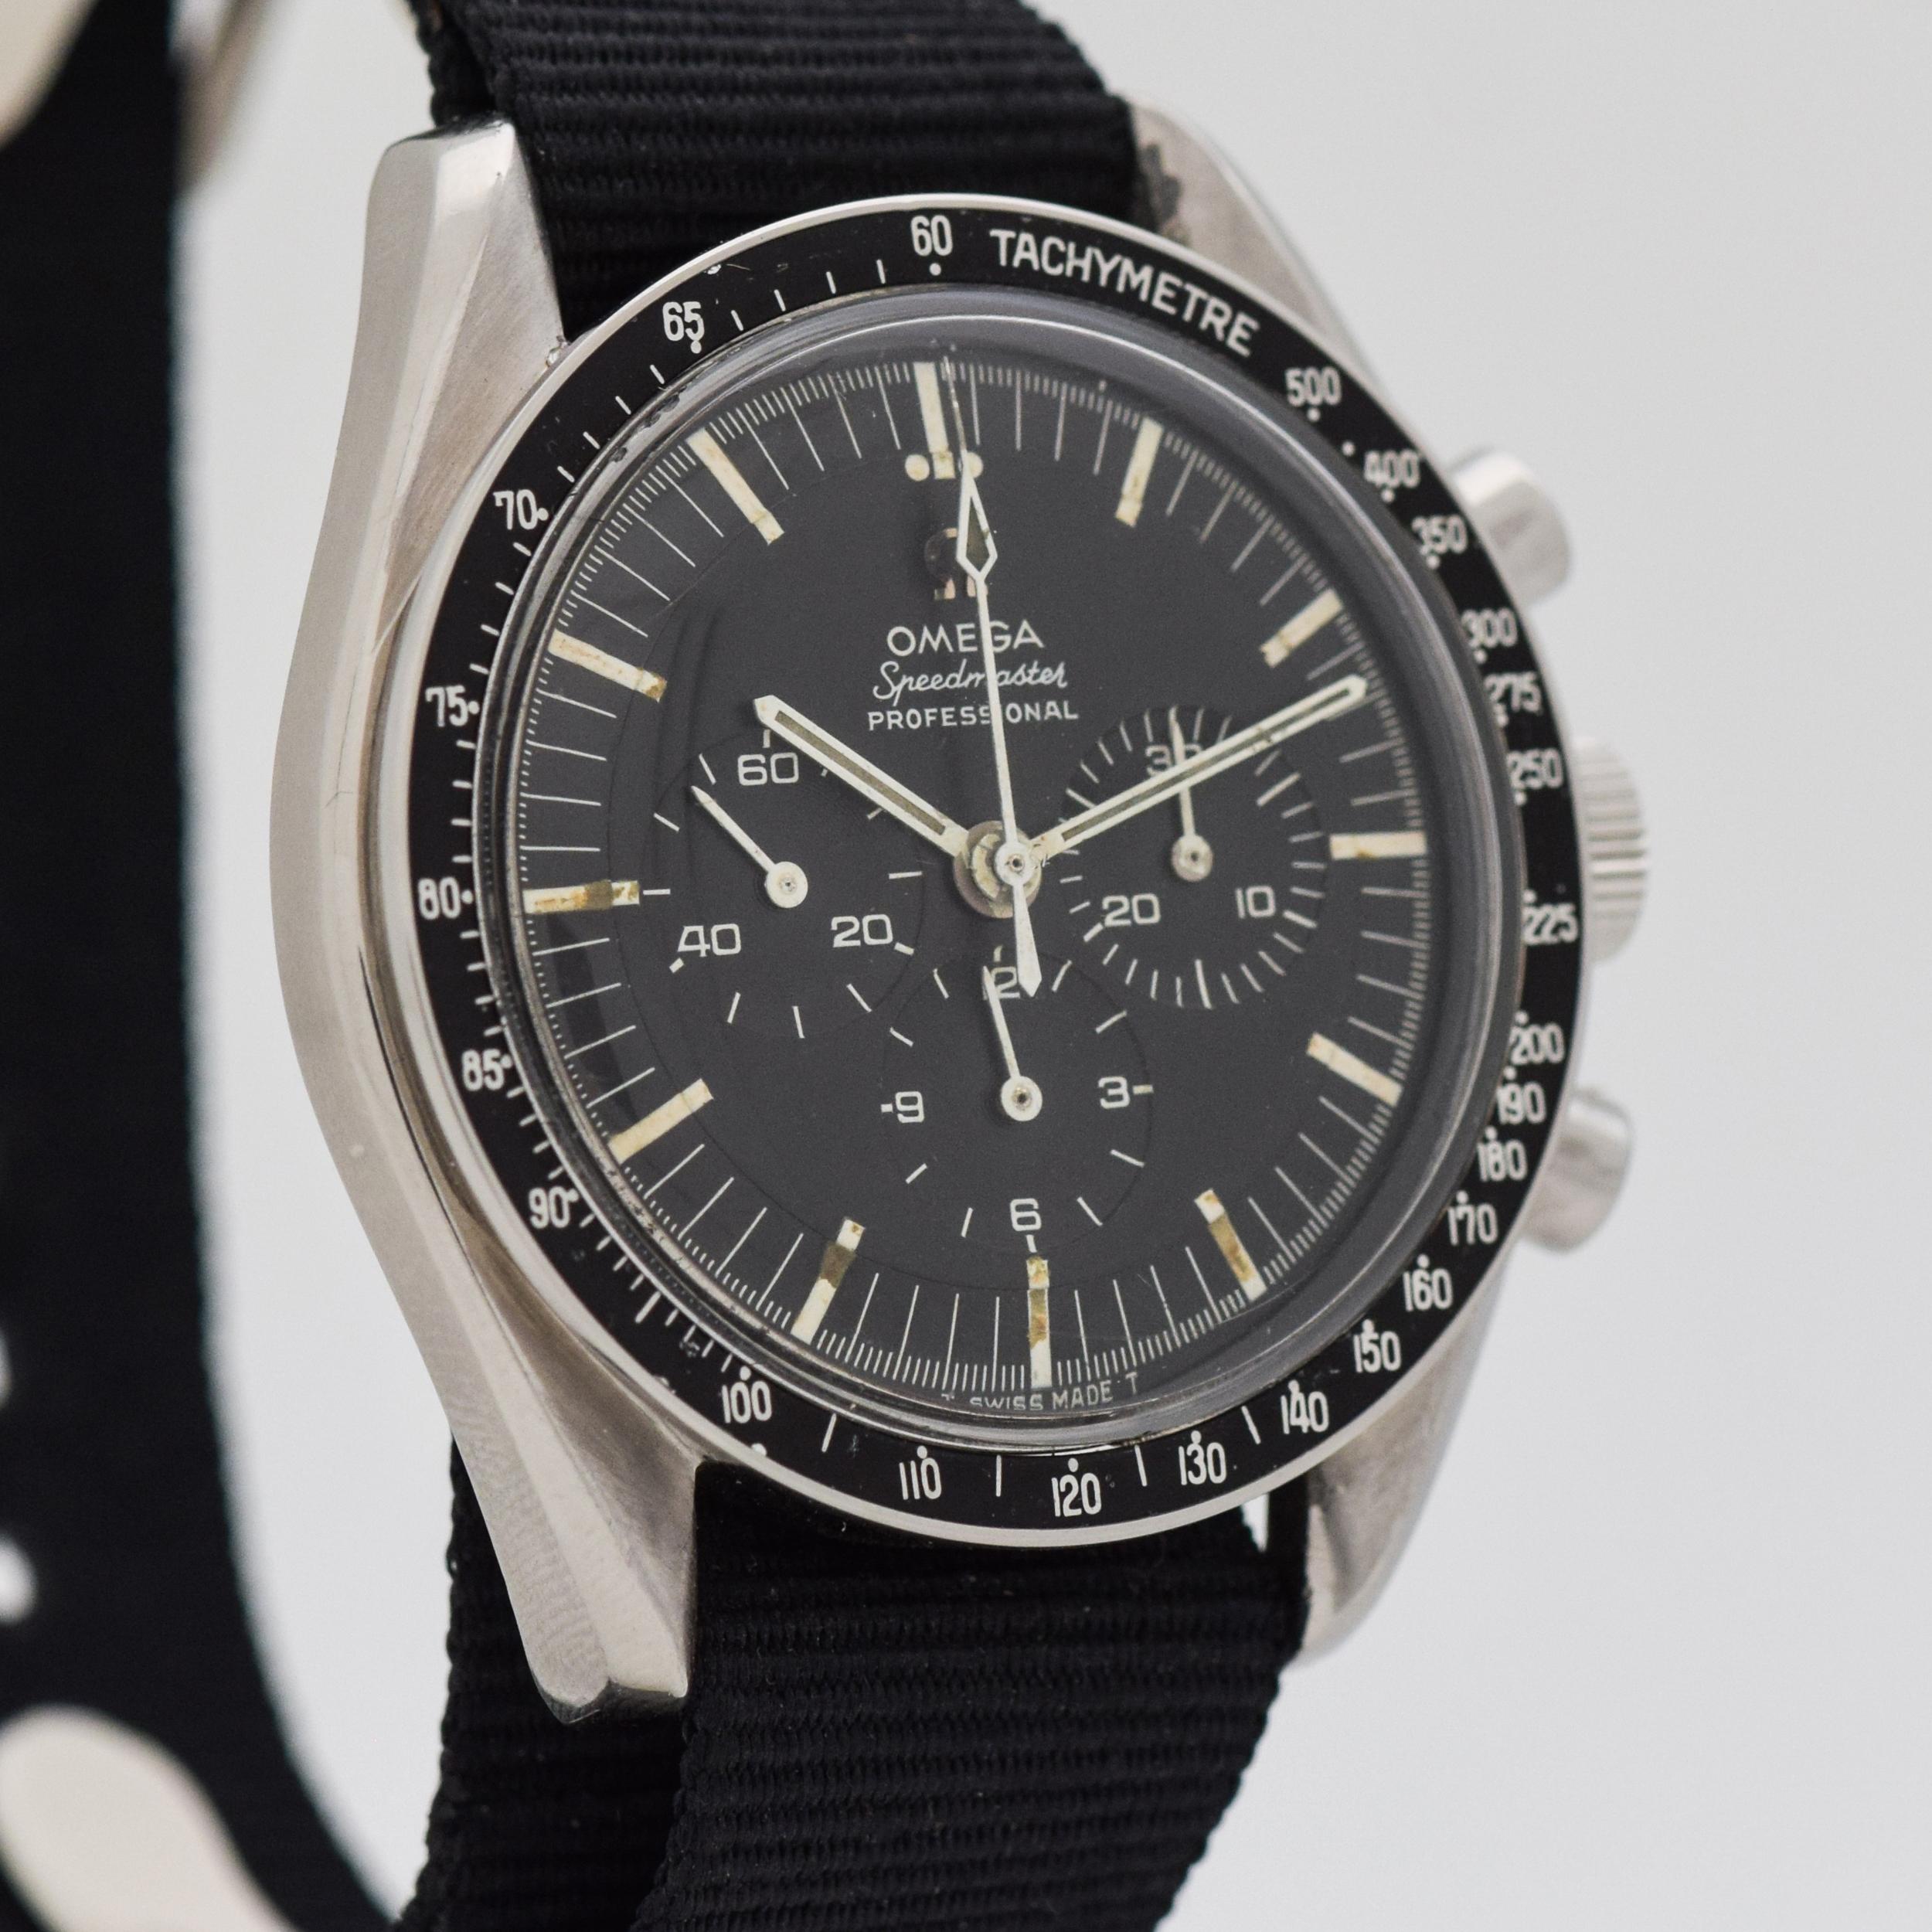 1968 Vintage Omega Speedmaster Professional Pre-Moon Highly Desirable and Highly Collectible Ref. 105012-66 Stainless Steel watch with Original Black Dial with White Luminous Markers. 42mm x 47mm lug to lug (1.65 in. x 1.85 in.) - Powered by a